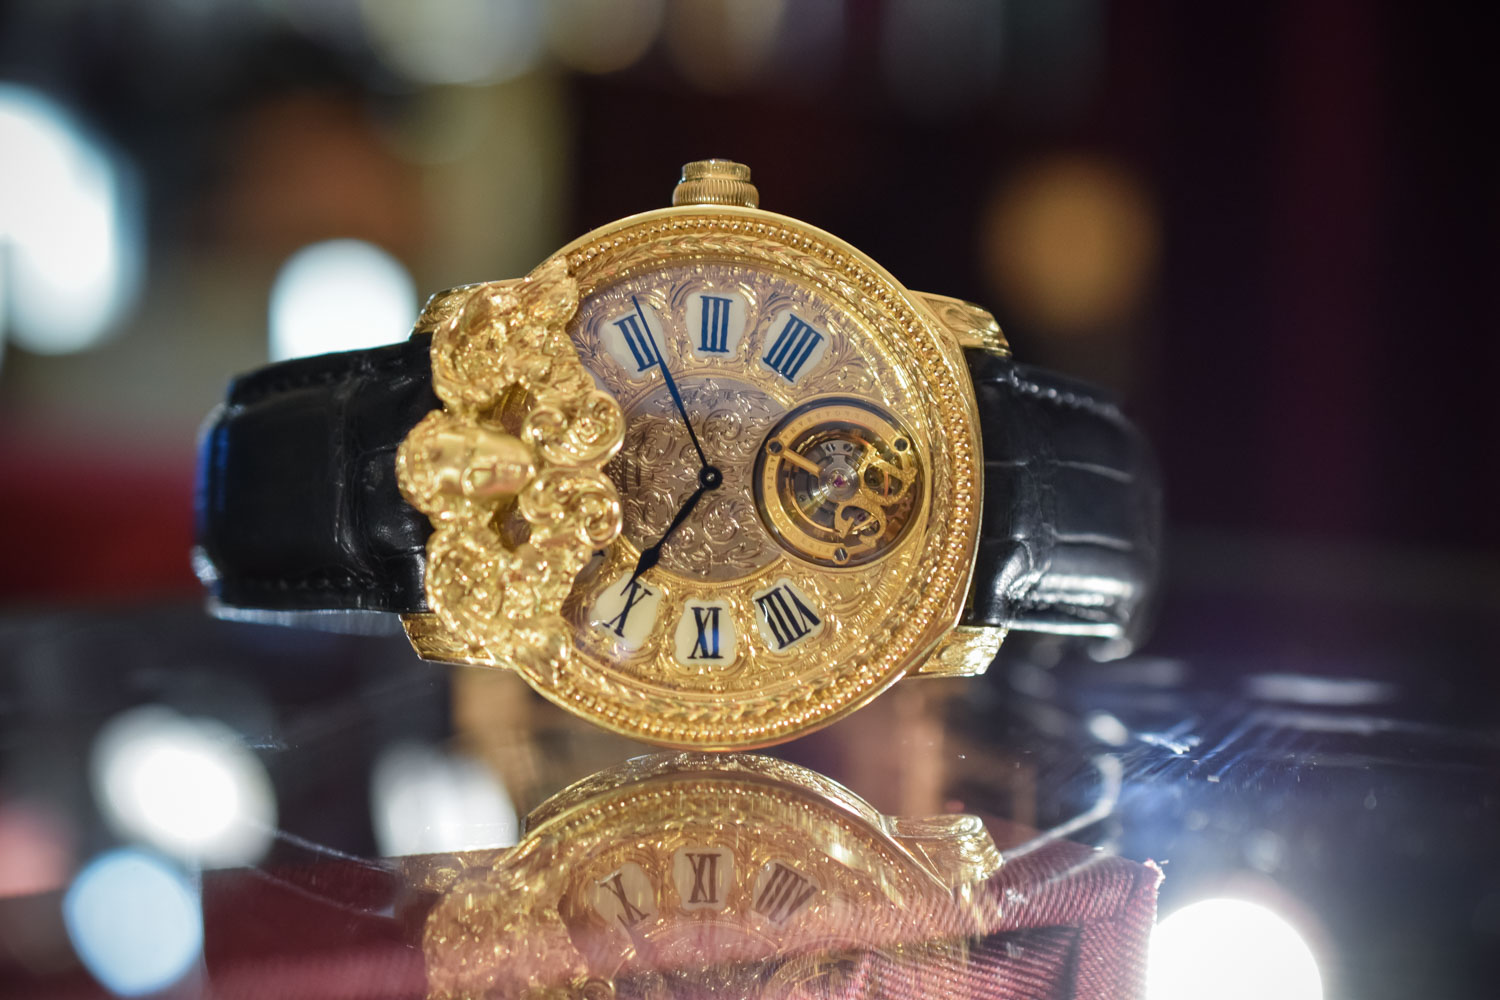 Dolce & Gabbana Makes Its Debuts In The World of Haute Horlogerie